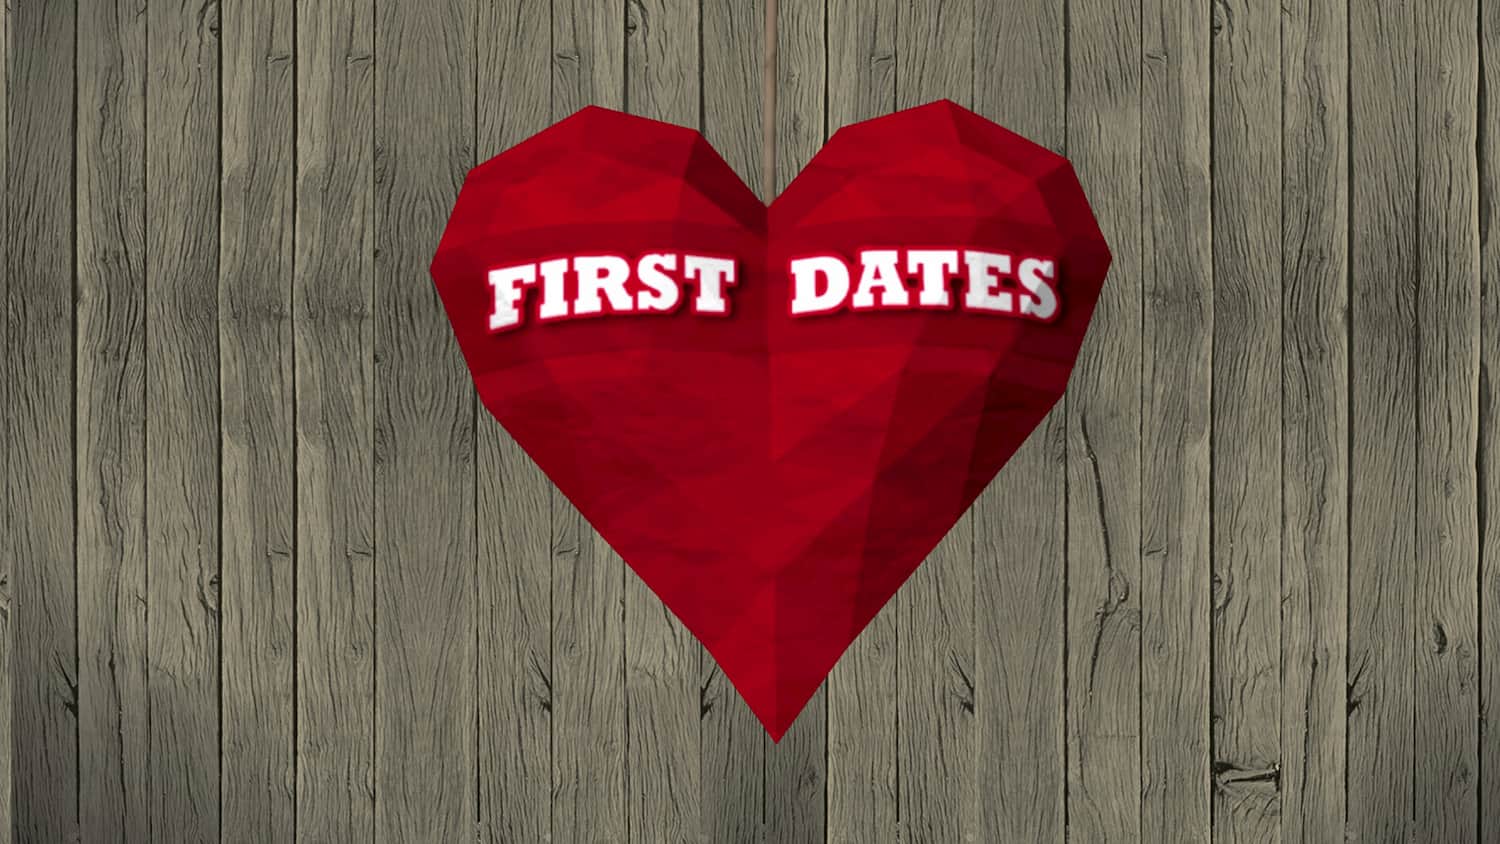 image from First Dates